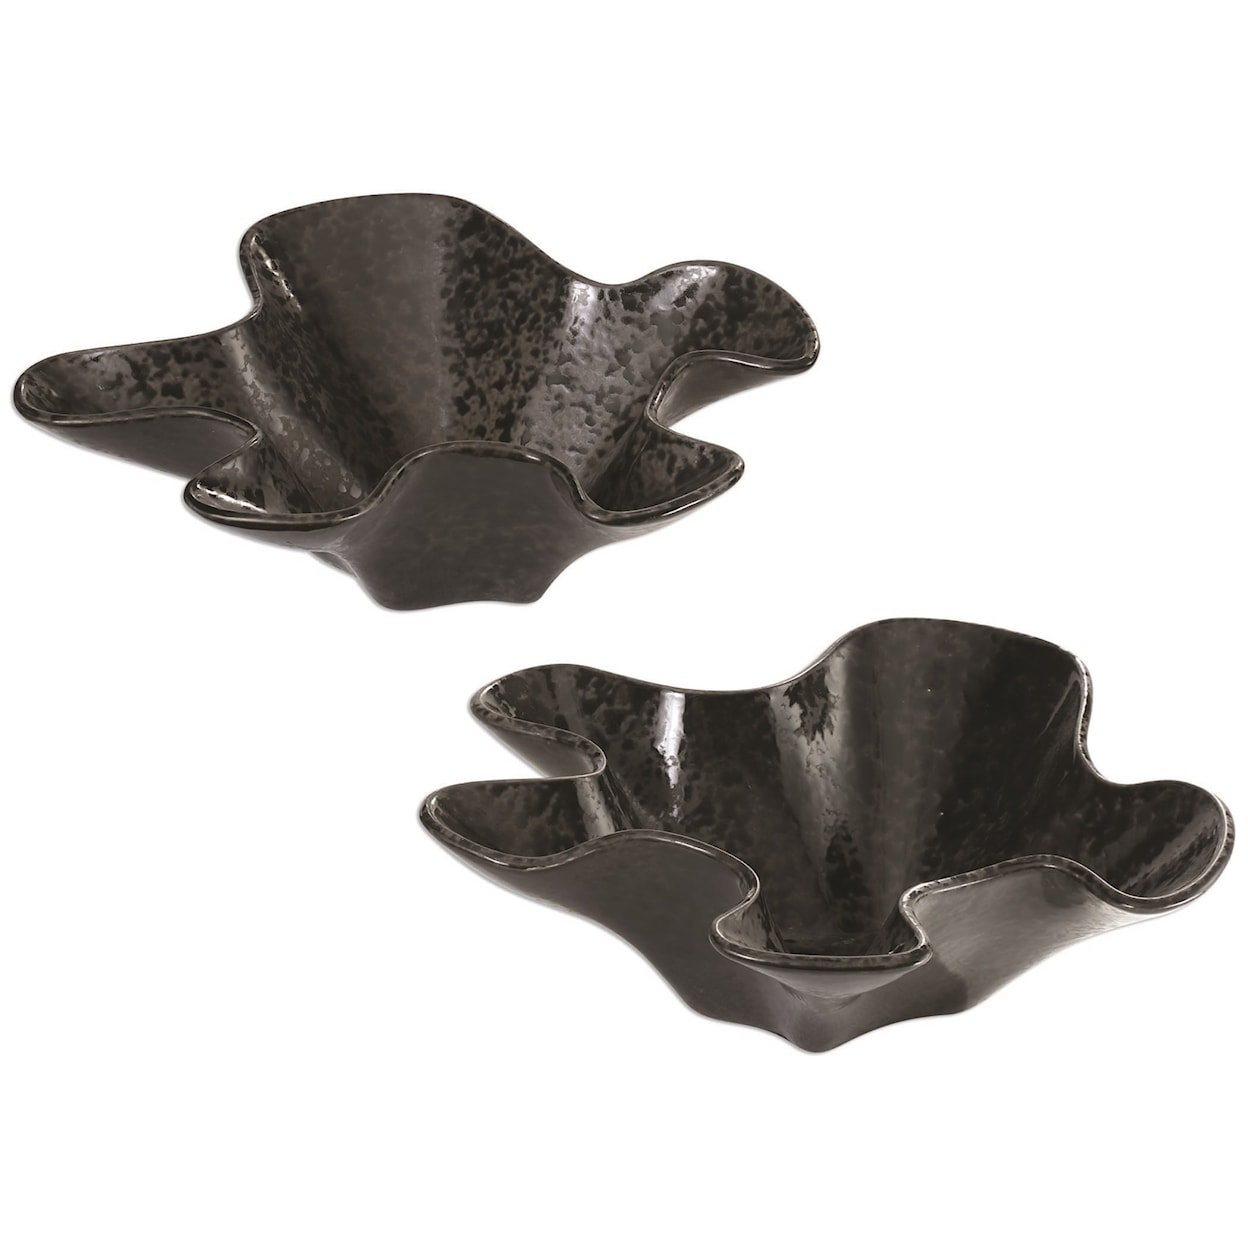 Uttermost Accessories Set of 2 Colson Bowls